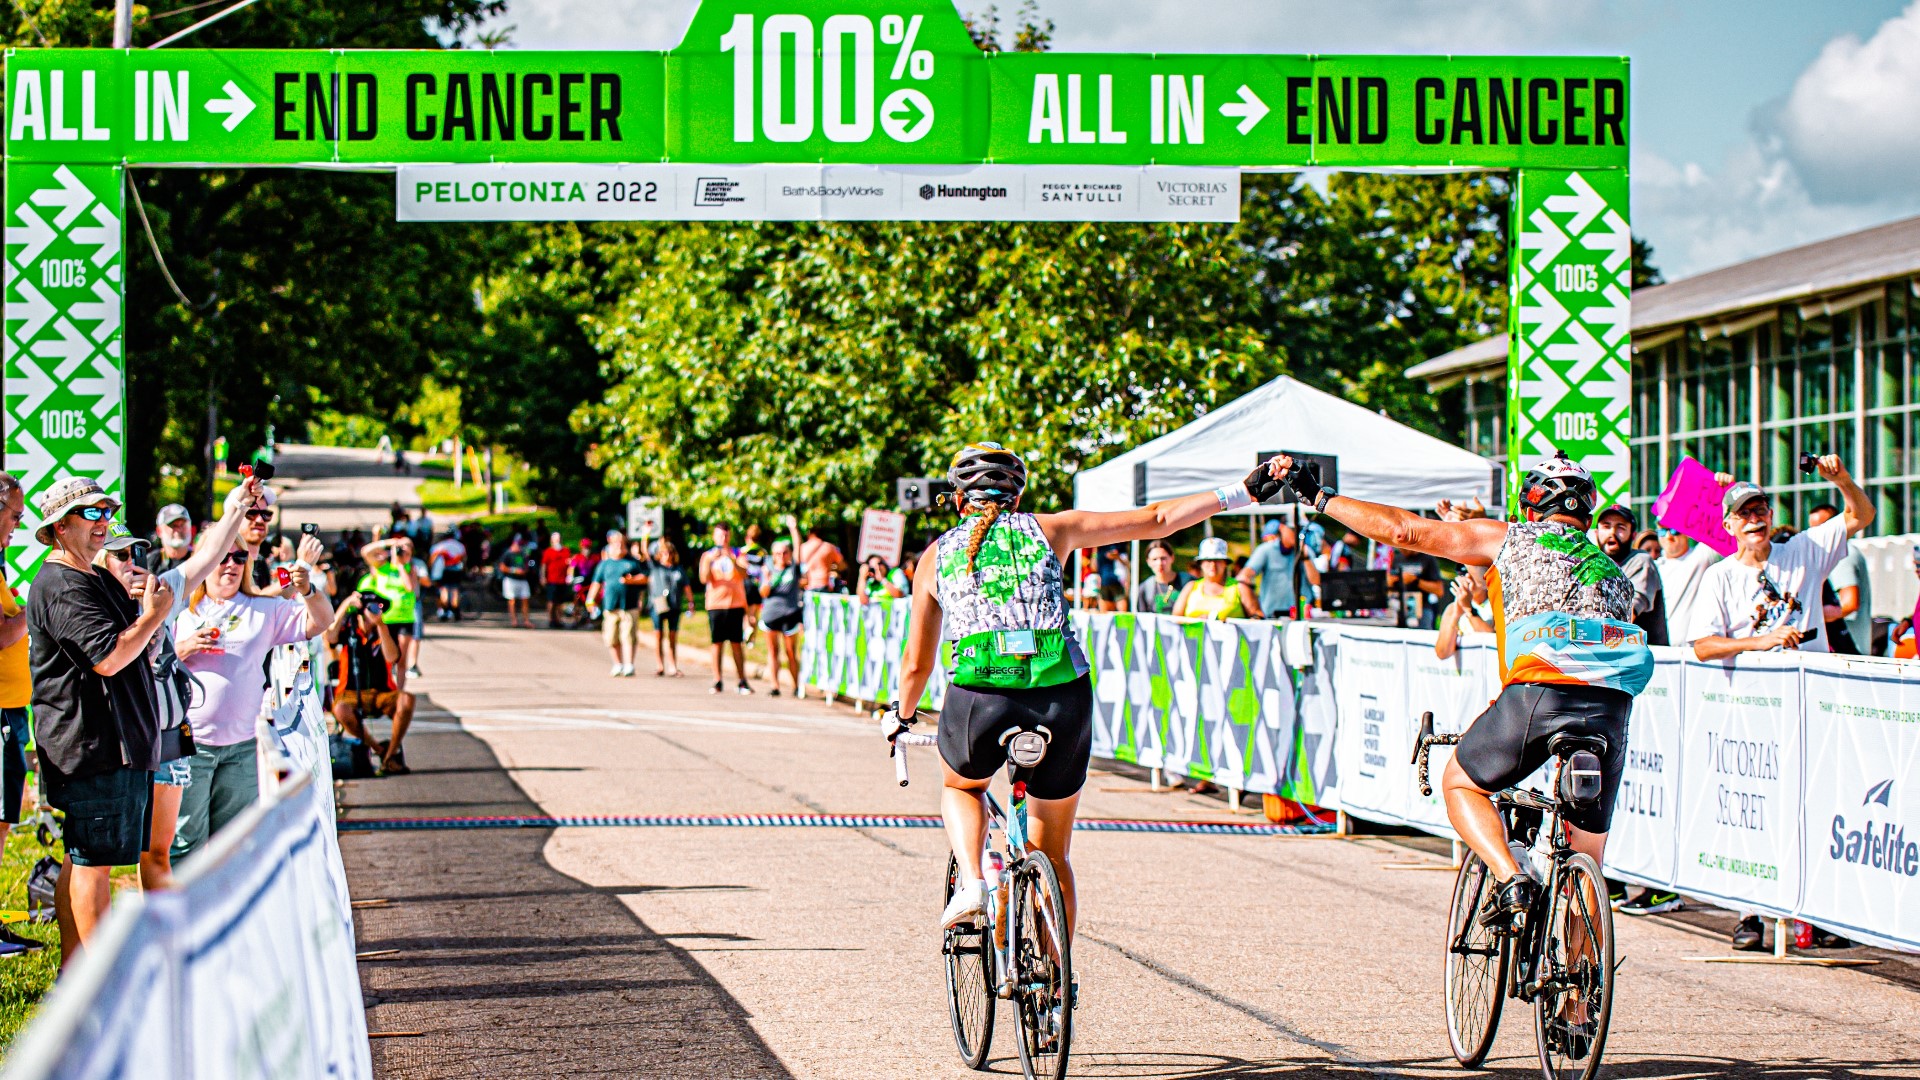 So far, Pelotonia has raised more than $258 million for the community’s One Goal to advance cancer research, according to a press release.